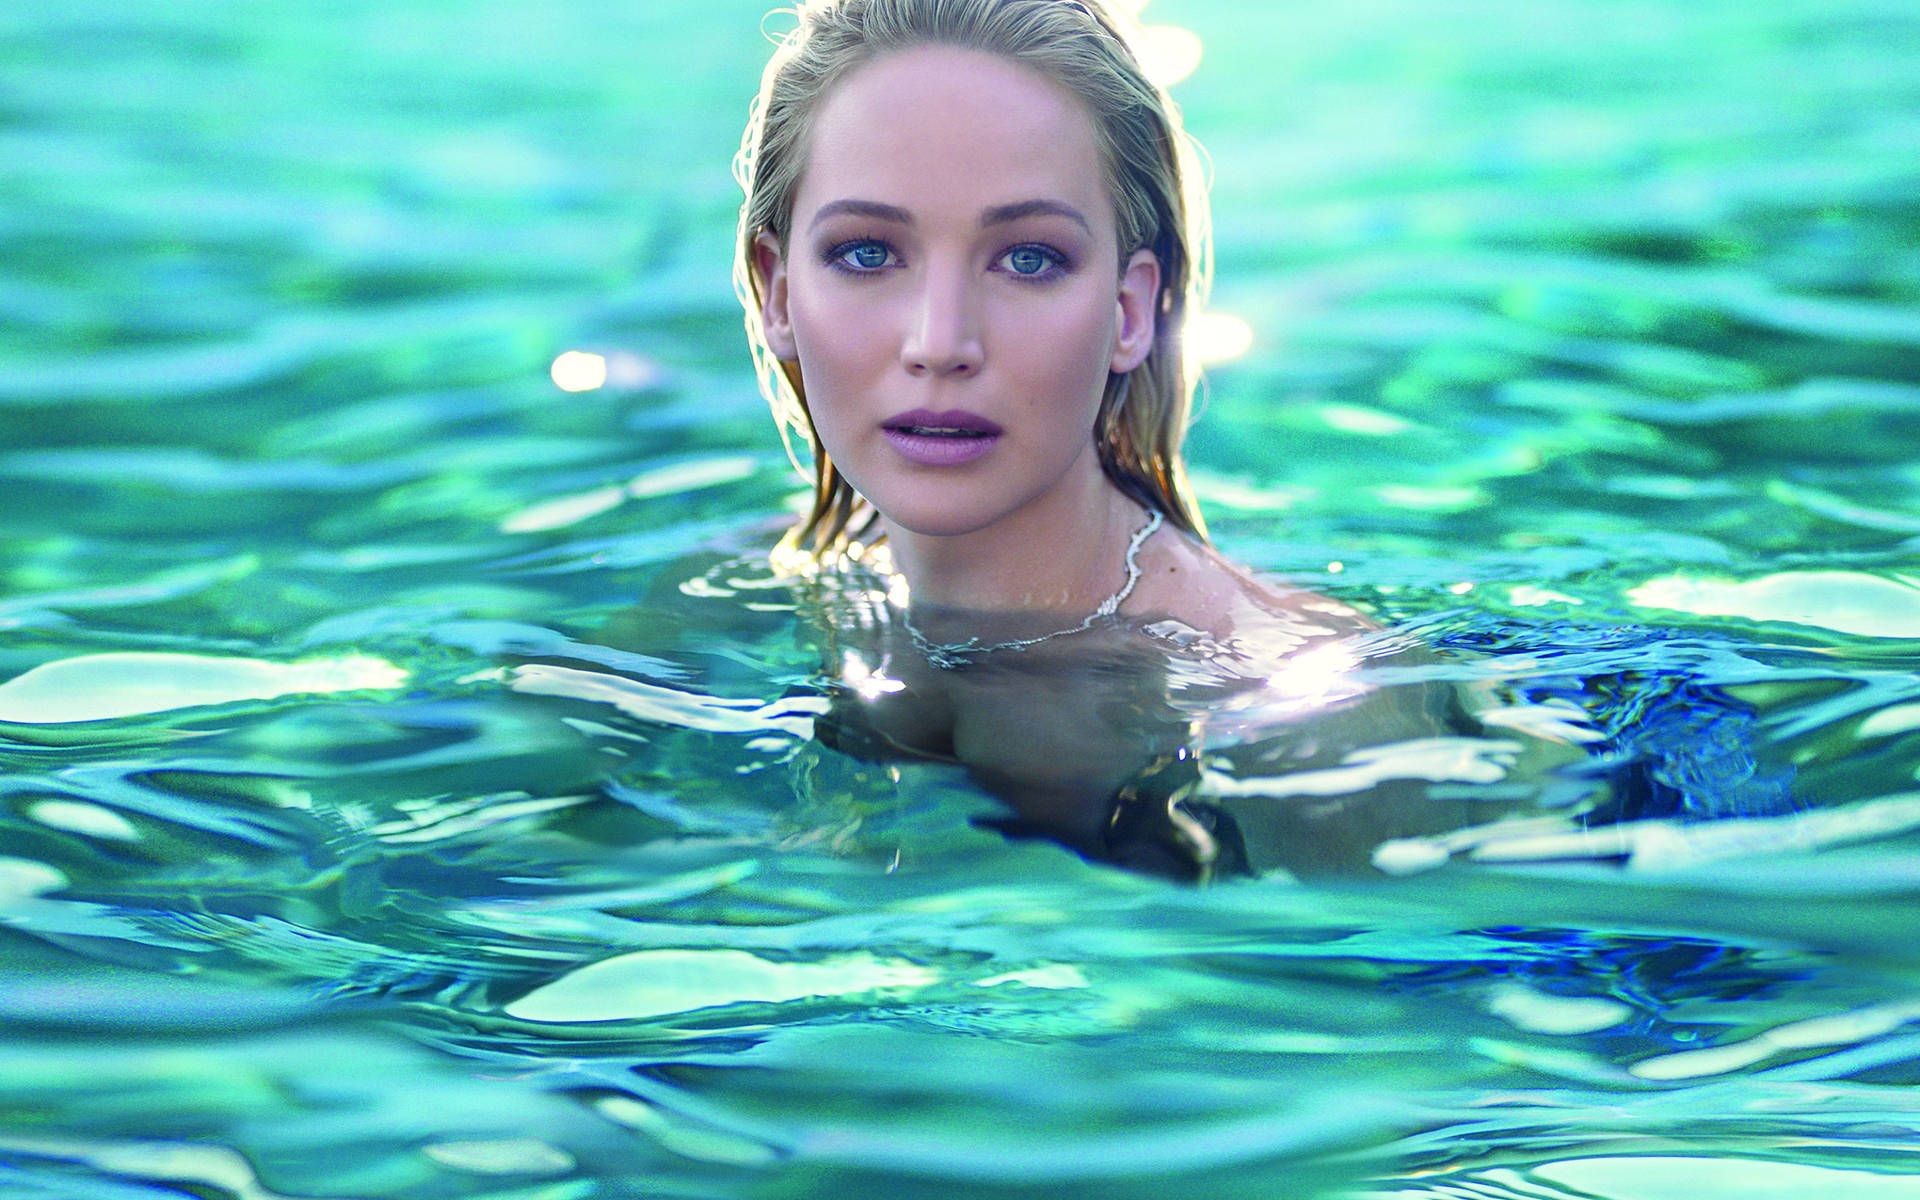 A woman in the water - Jennifer Lawrence